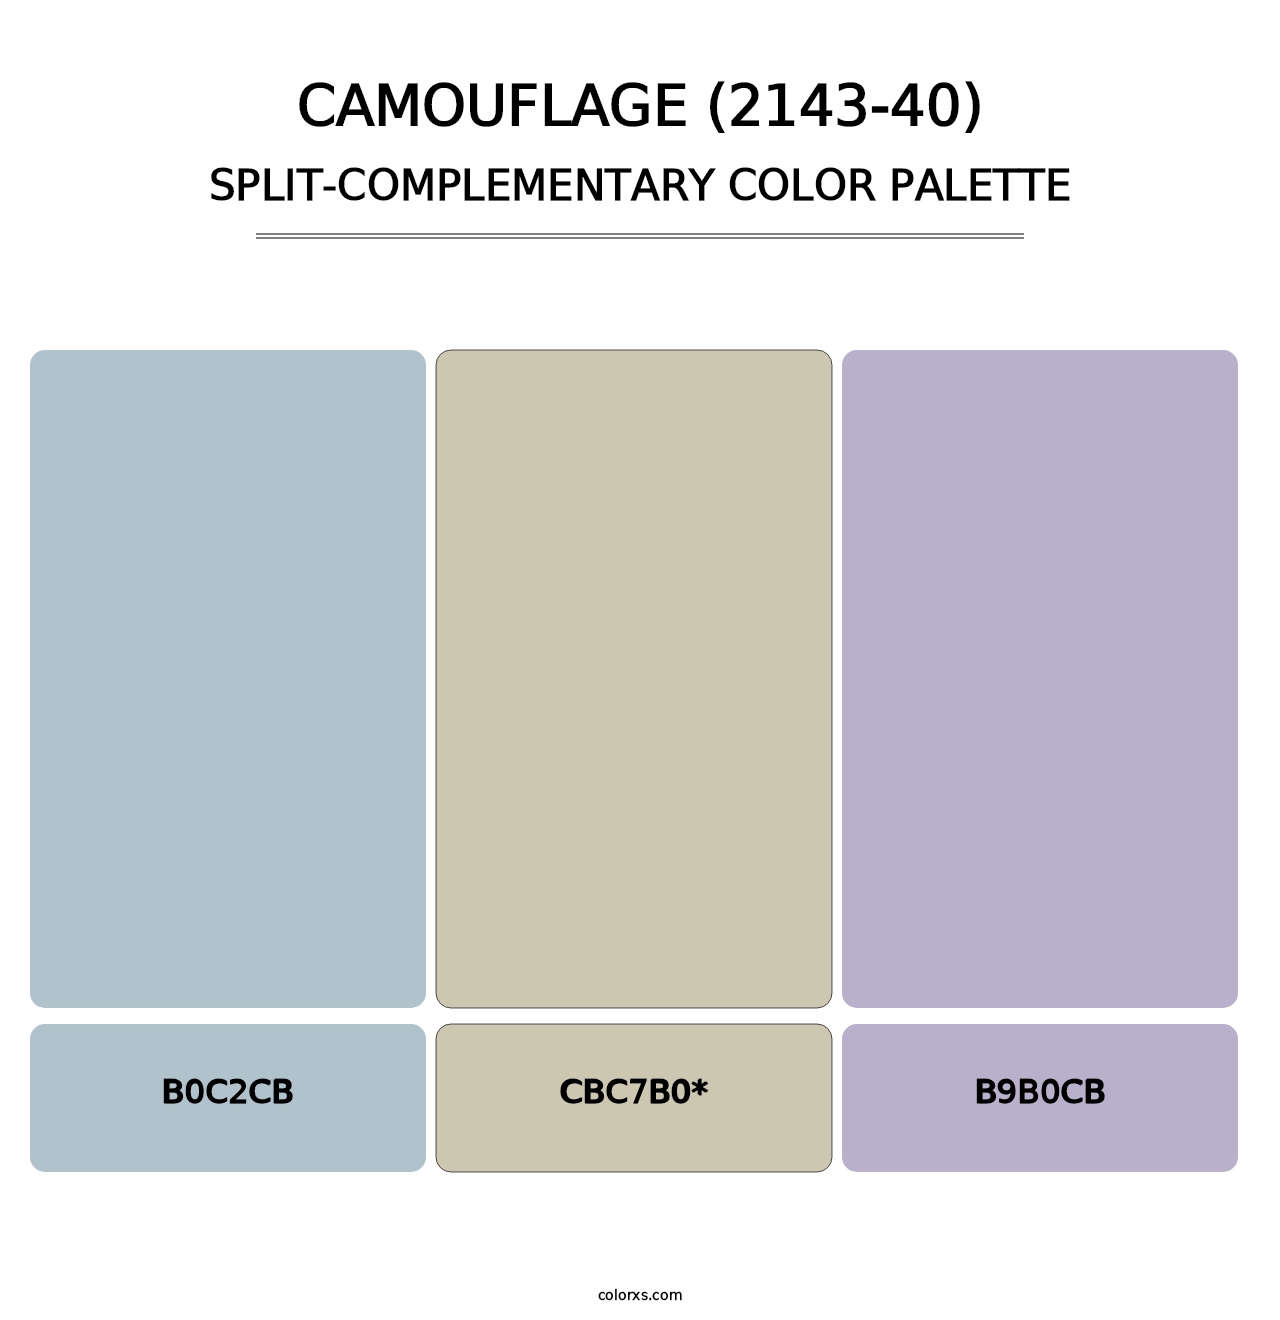 Camouflage (2143-40) - Split-Complementary Color Palette